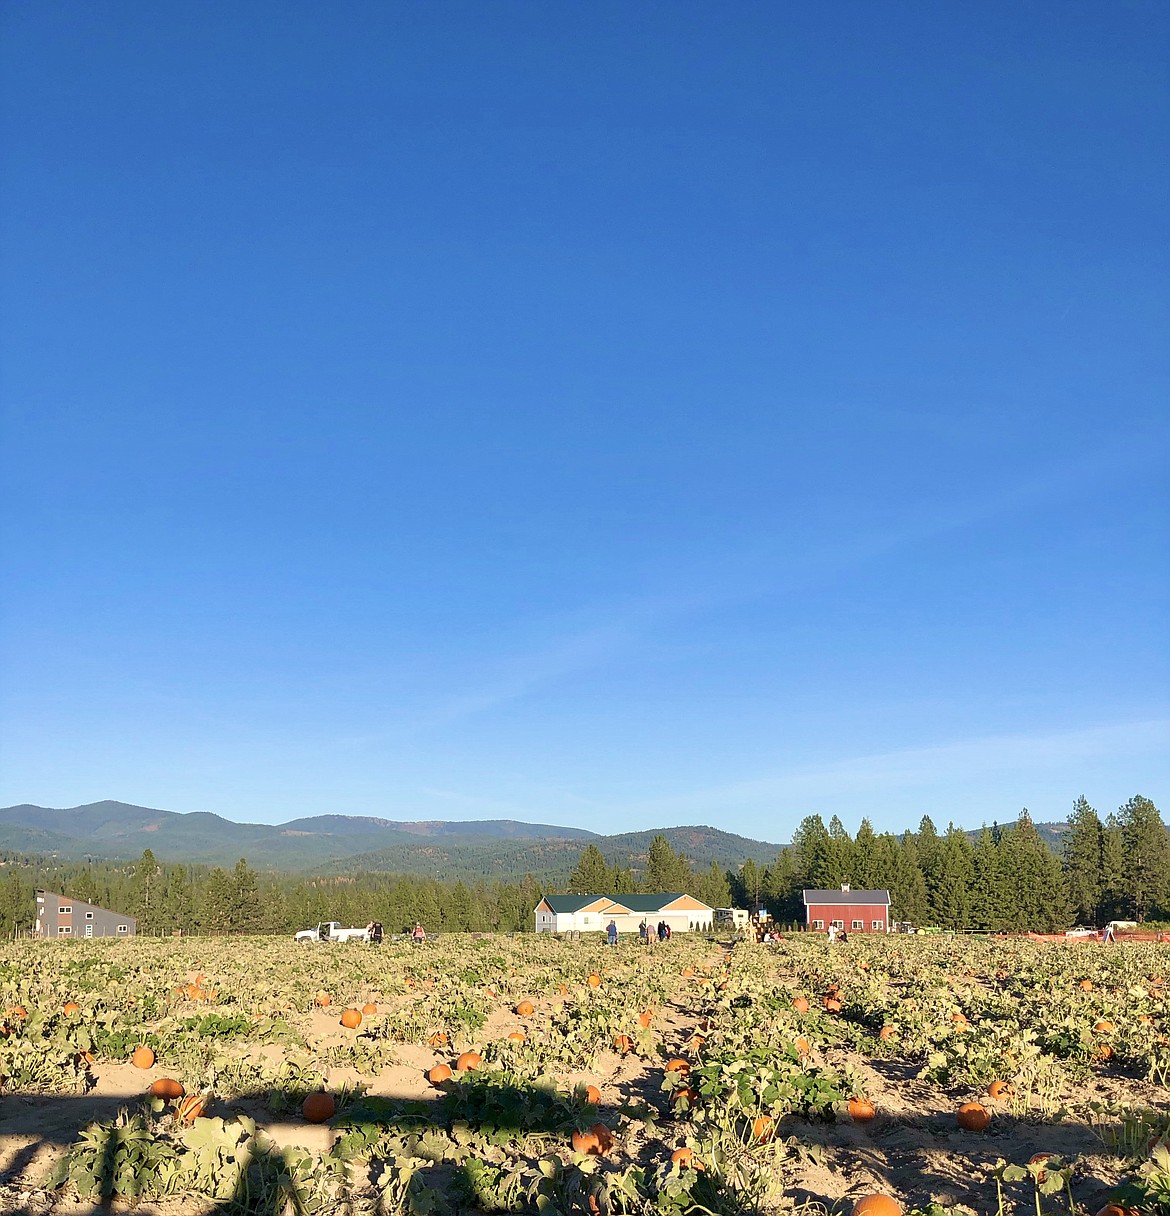 A pumpkin patch at Siemers Farm, part of Green Bluff Growers, a small unincorporated farming community in Spokane County. Photo courtesy of Bridget Haynos